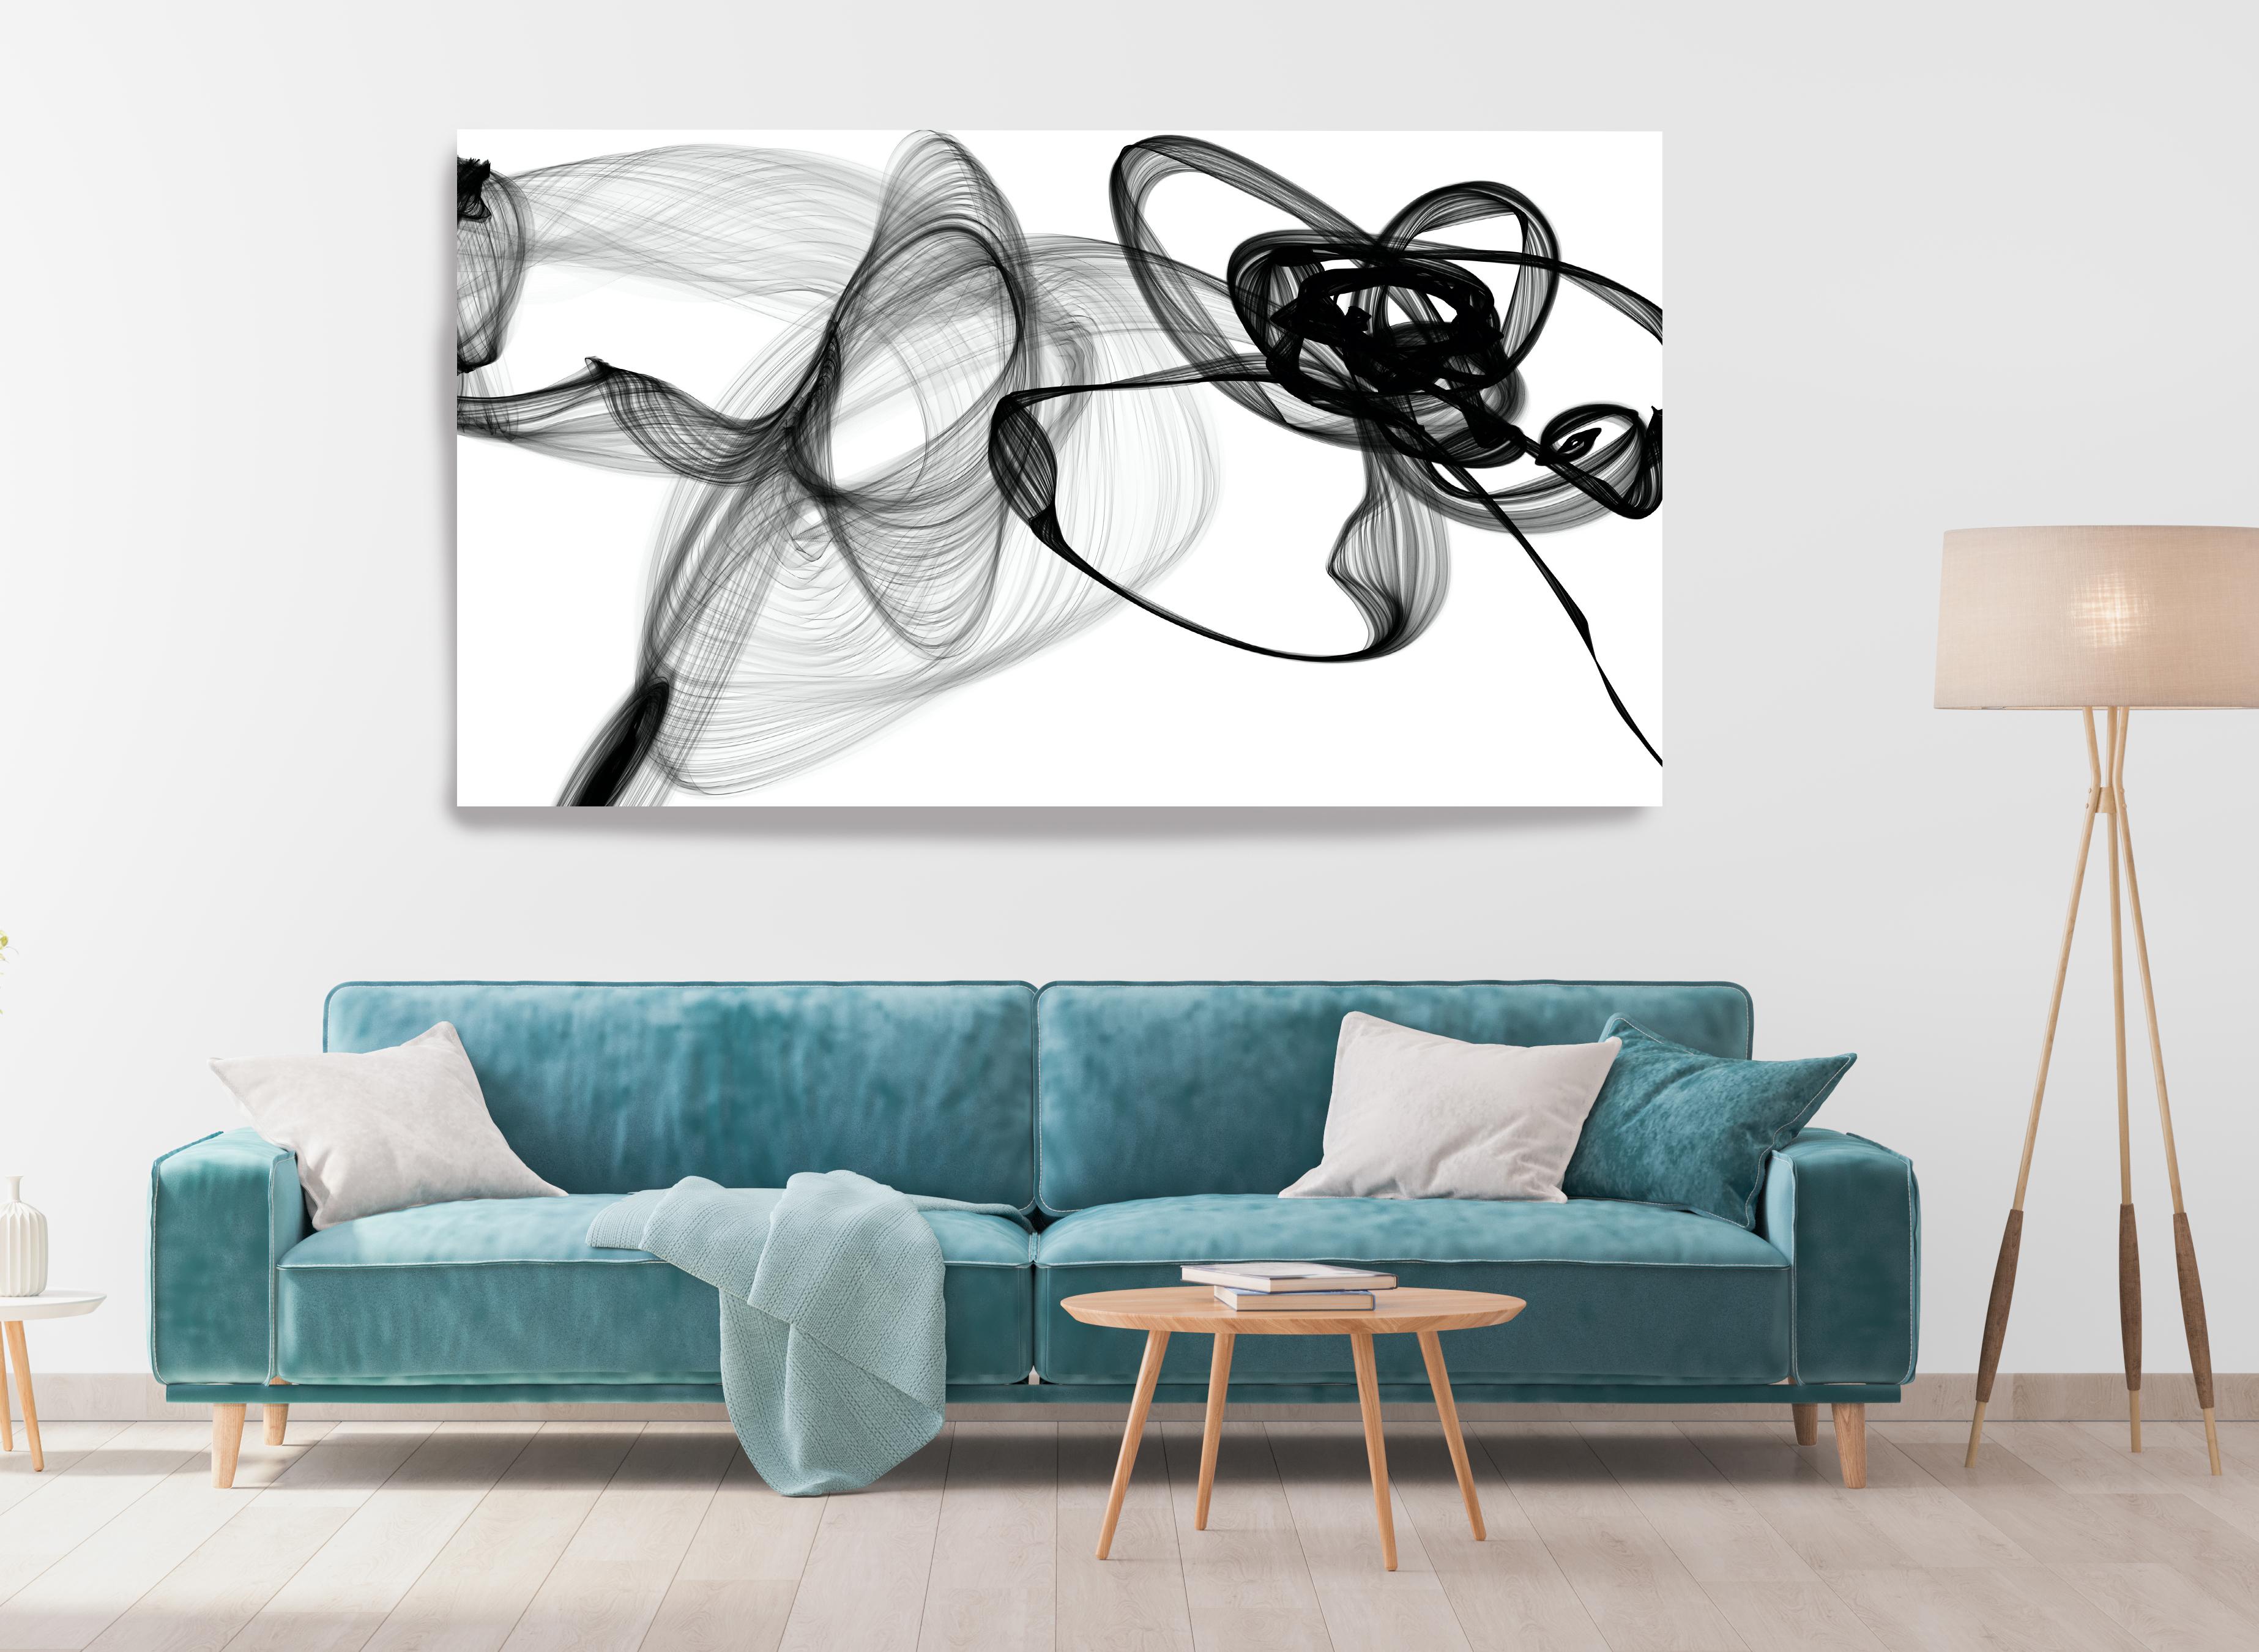 Black White Minimalist New Media vs Painting 40"H X 60"W Altered and Shaped - Mixed Media Art by Irena Orlov